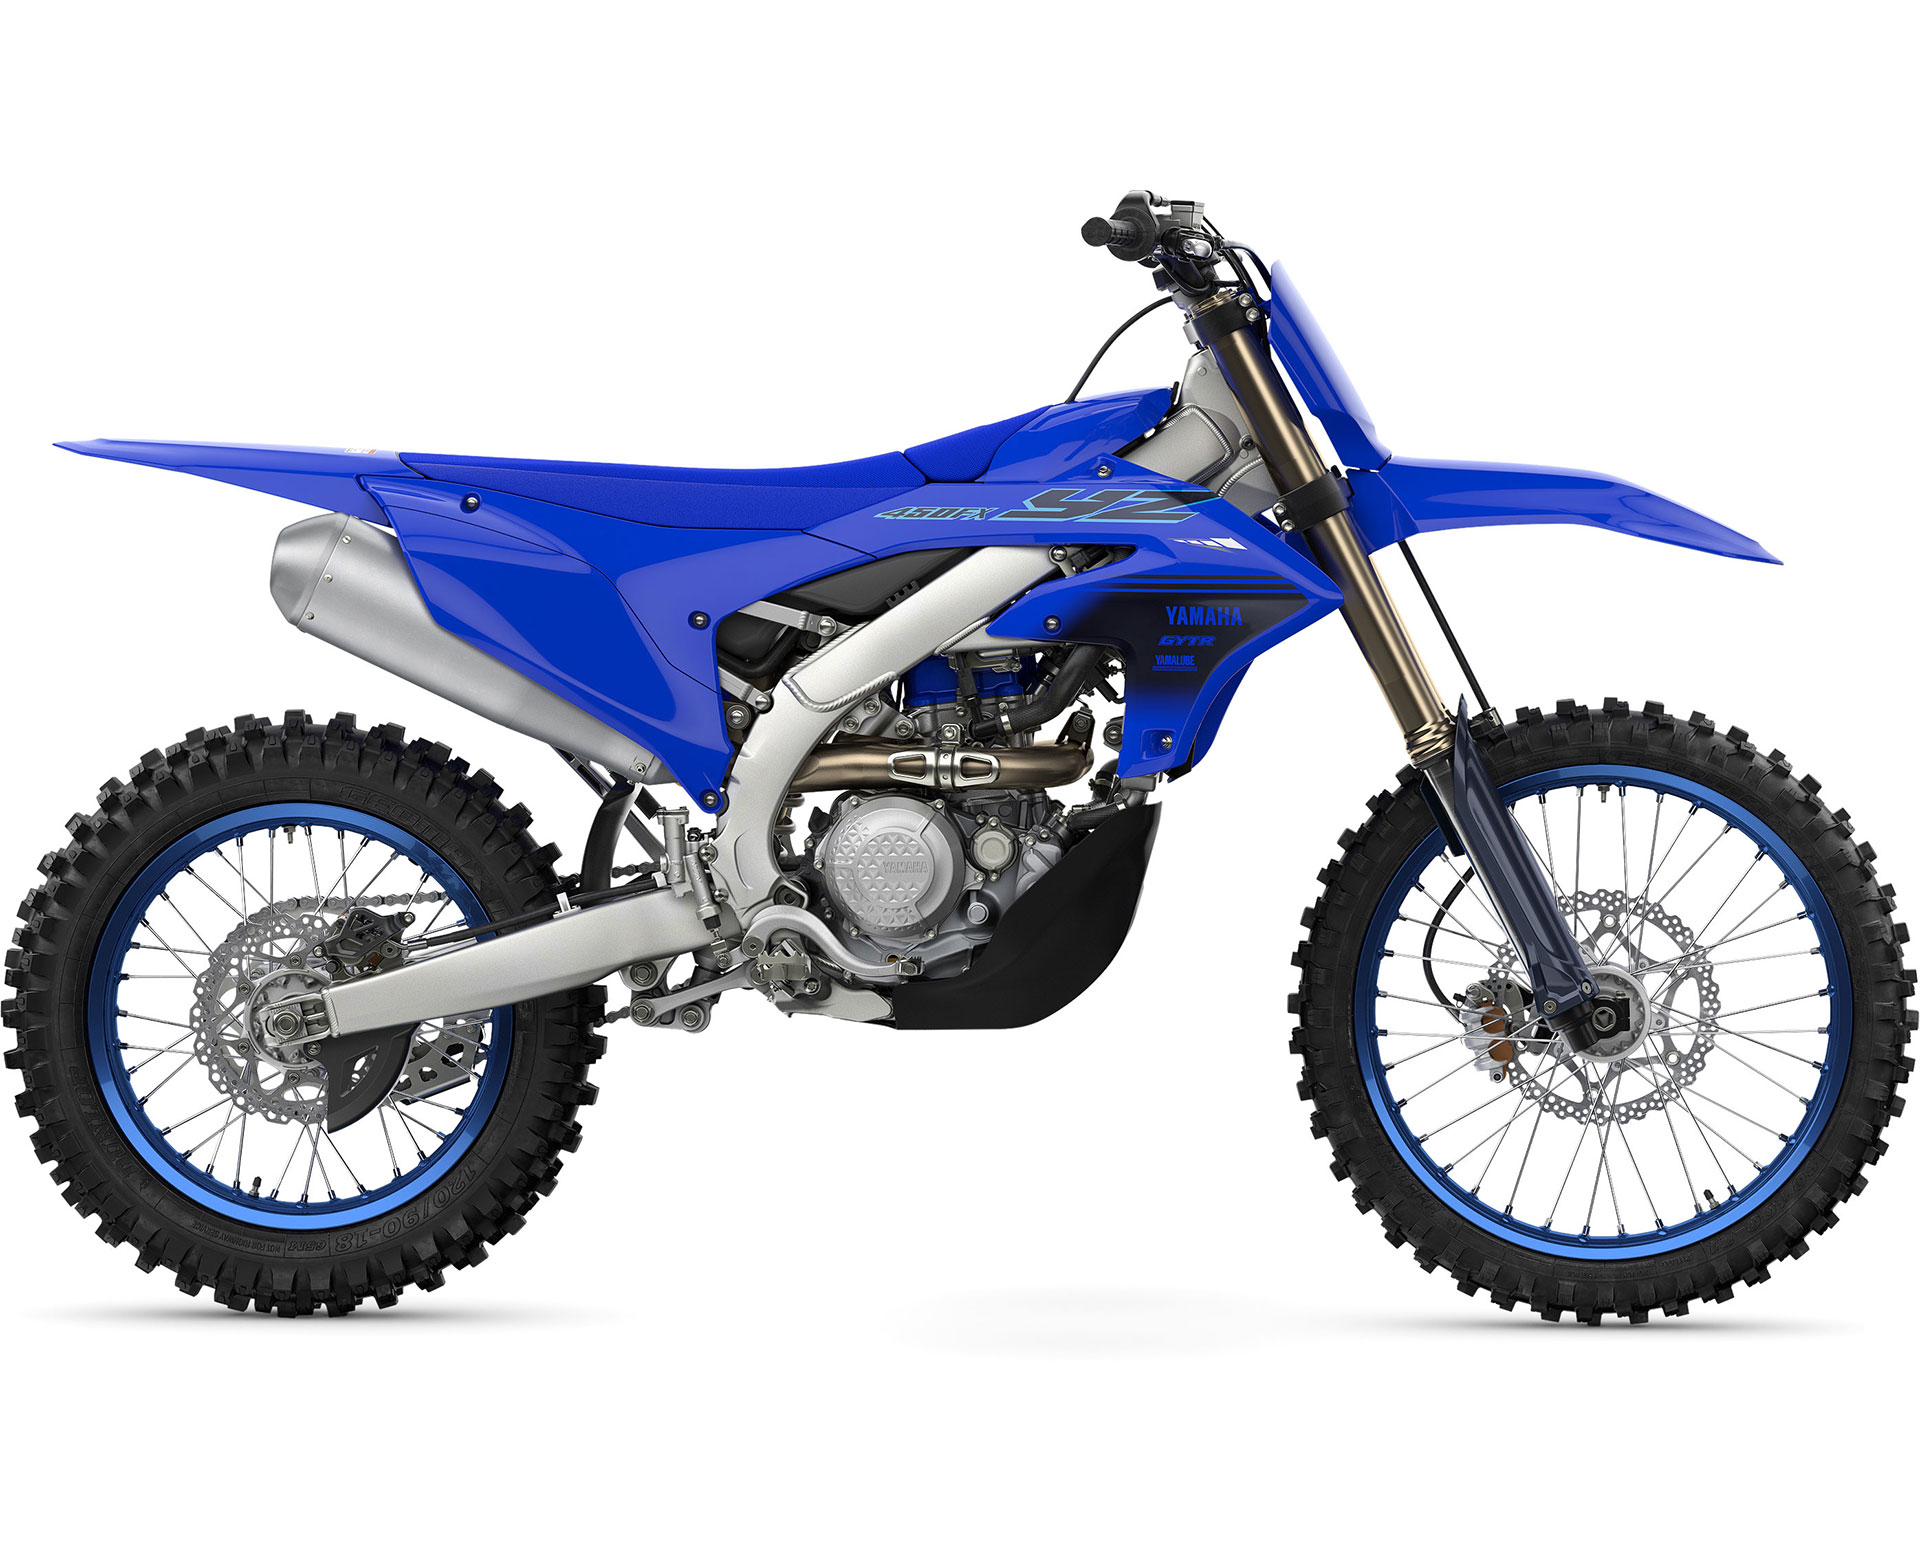 Thumbnail of your customized 2024 YZ450FX